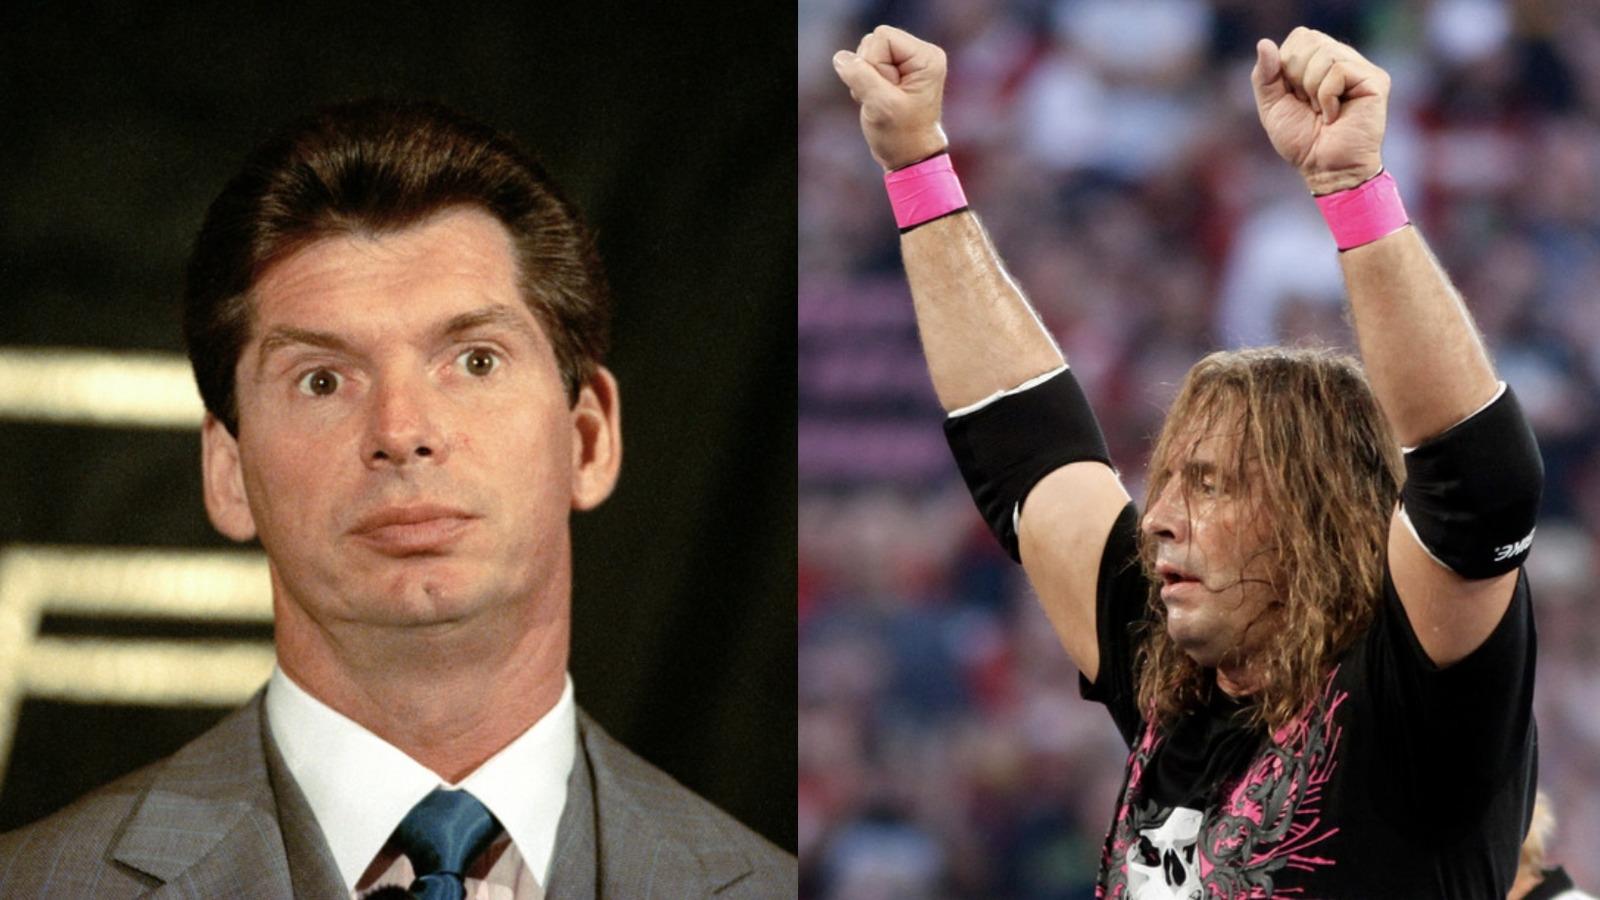 The Montreal Screwjob is one of the most infamous moments in WWE history. Why did Vince McMahon screw Bret Hart over?